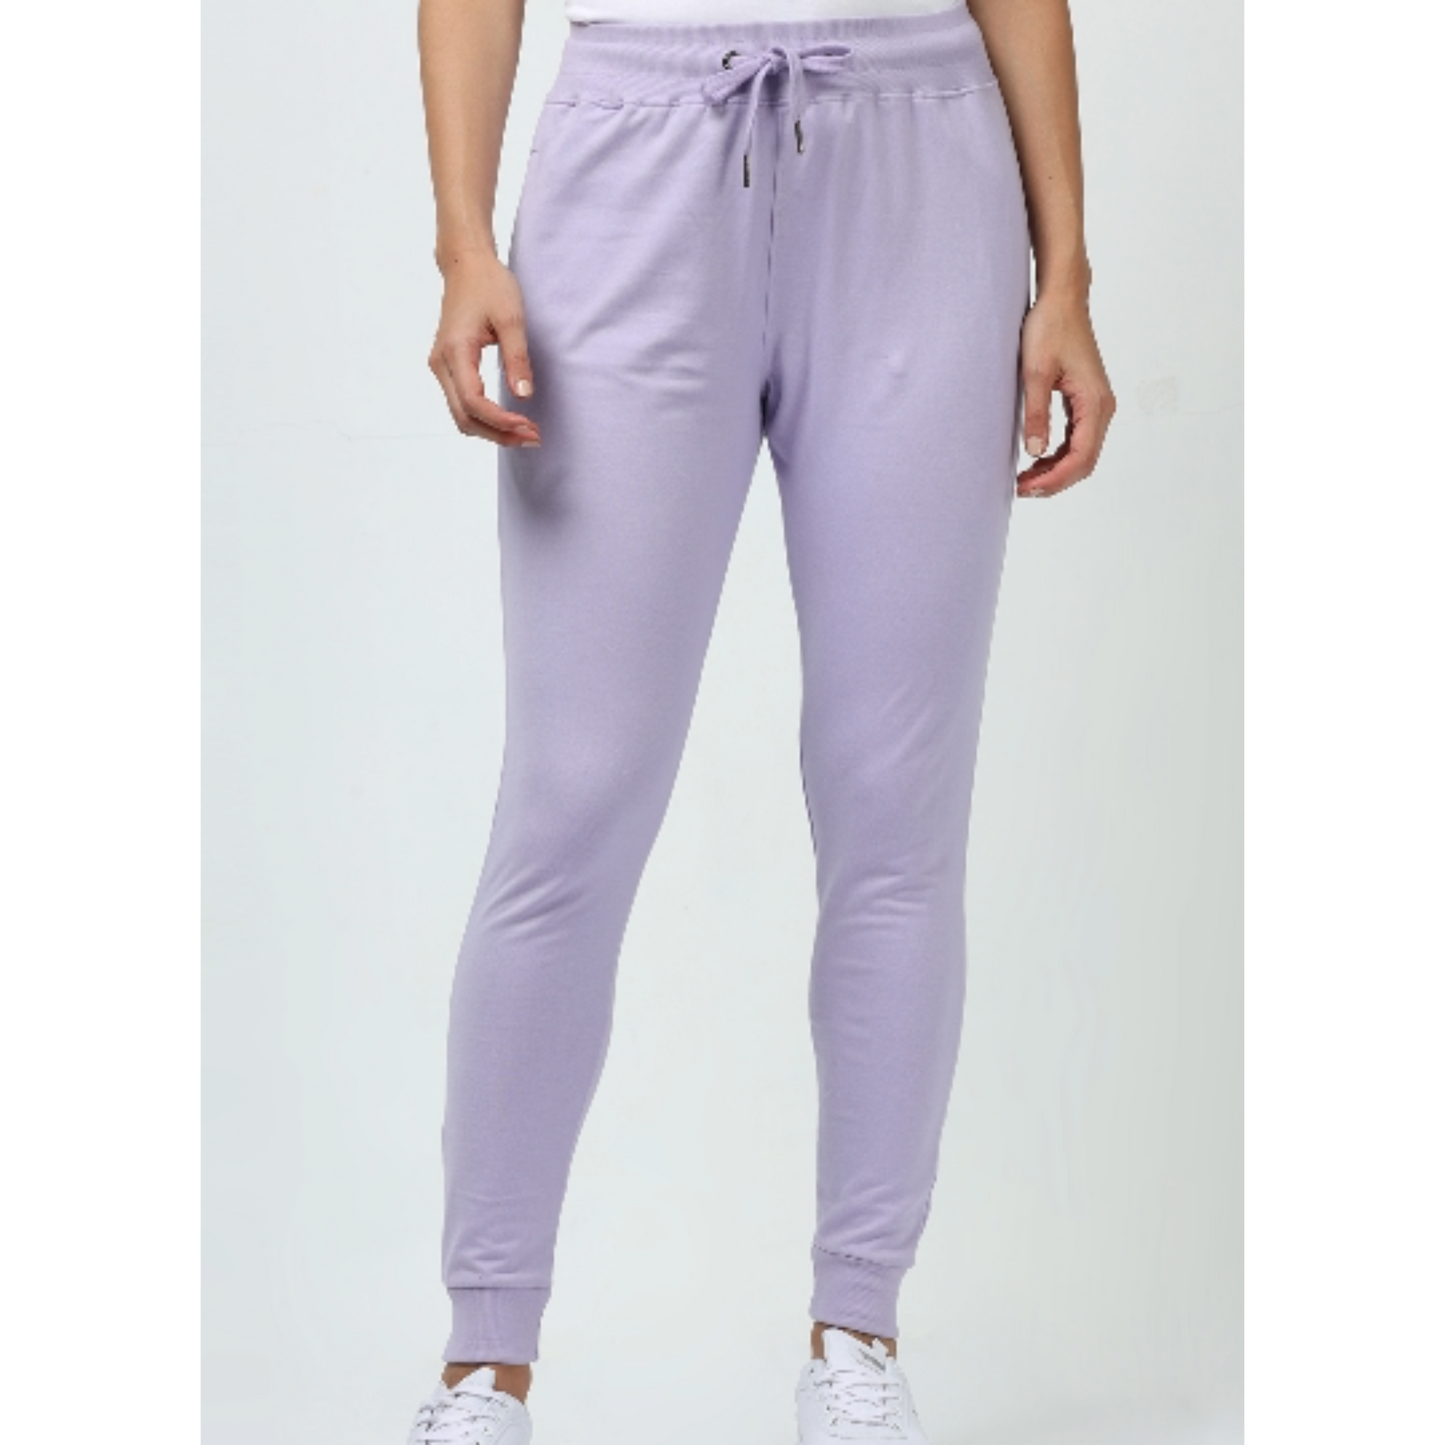 Nelate High quality Lavender Women's Joggers